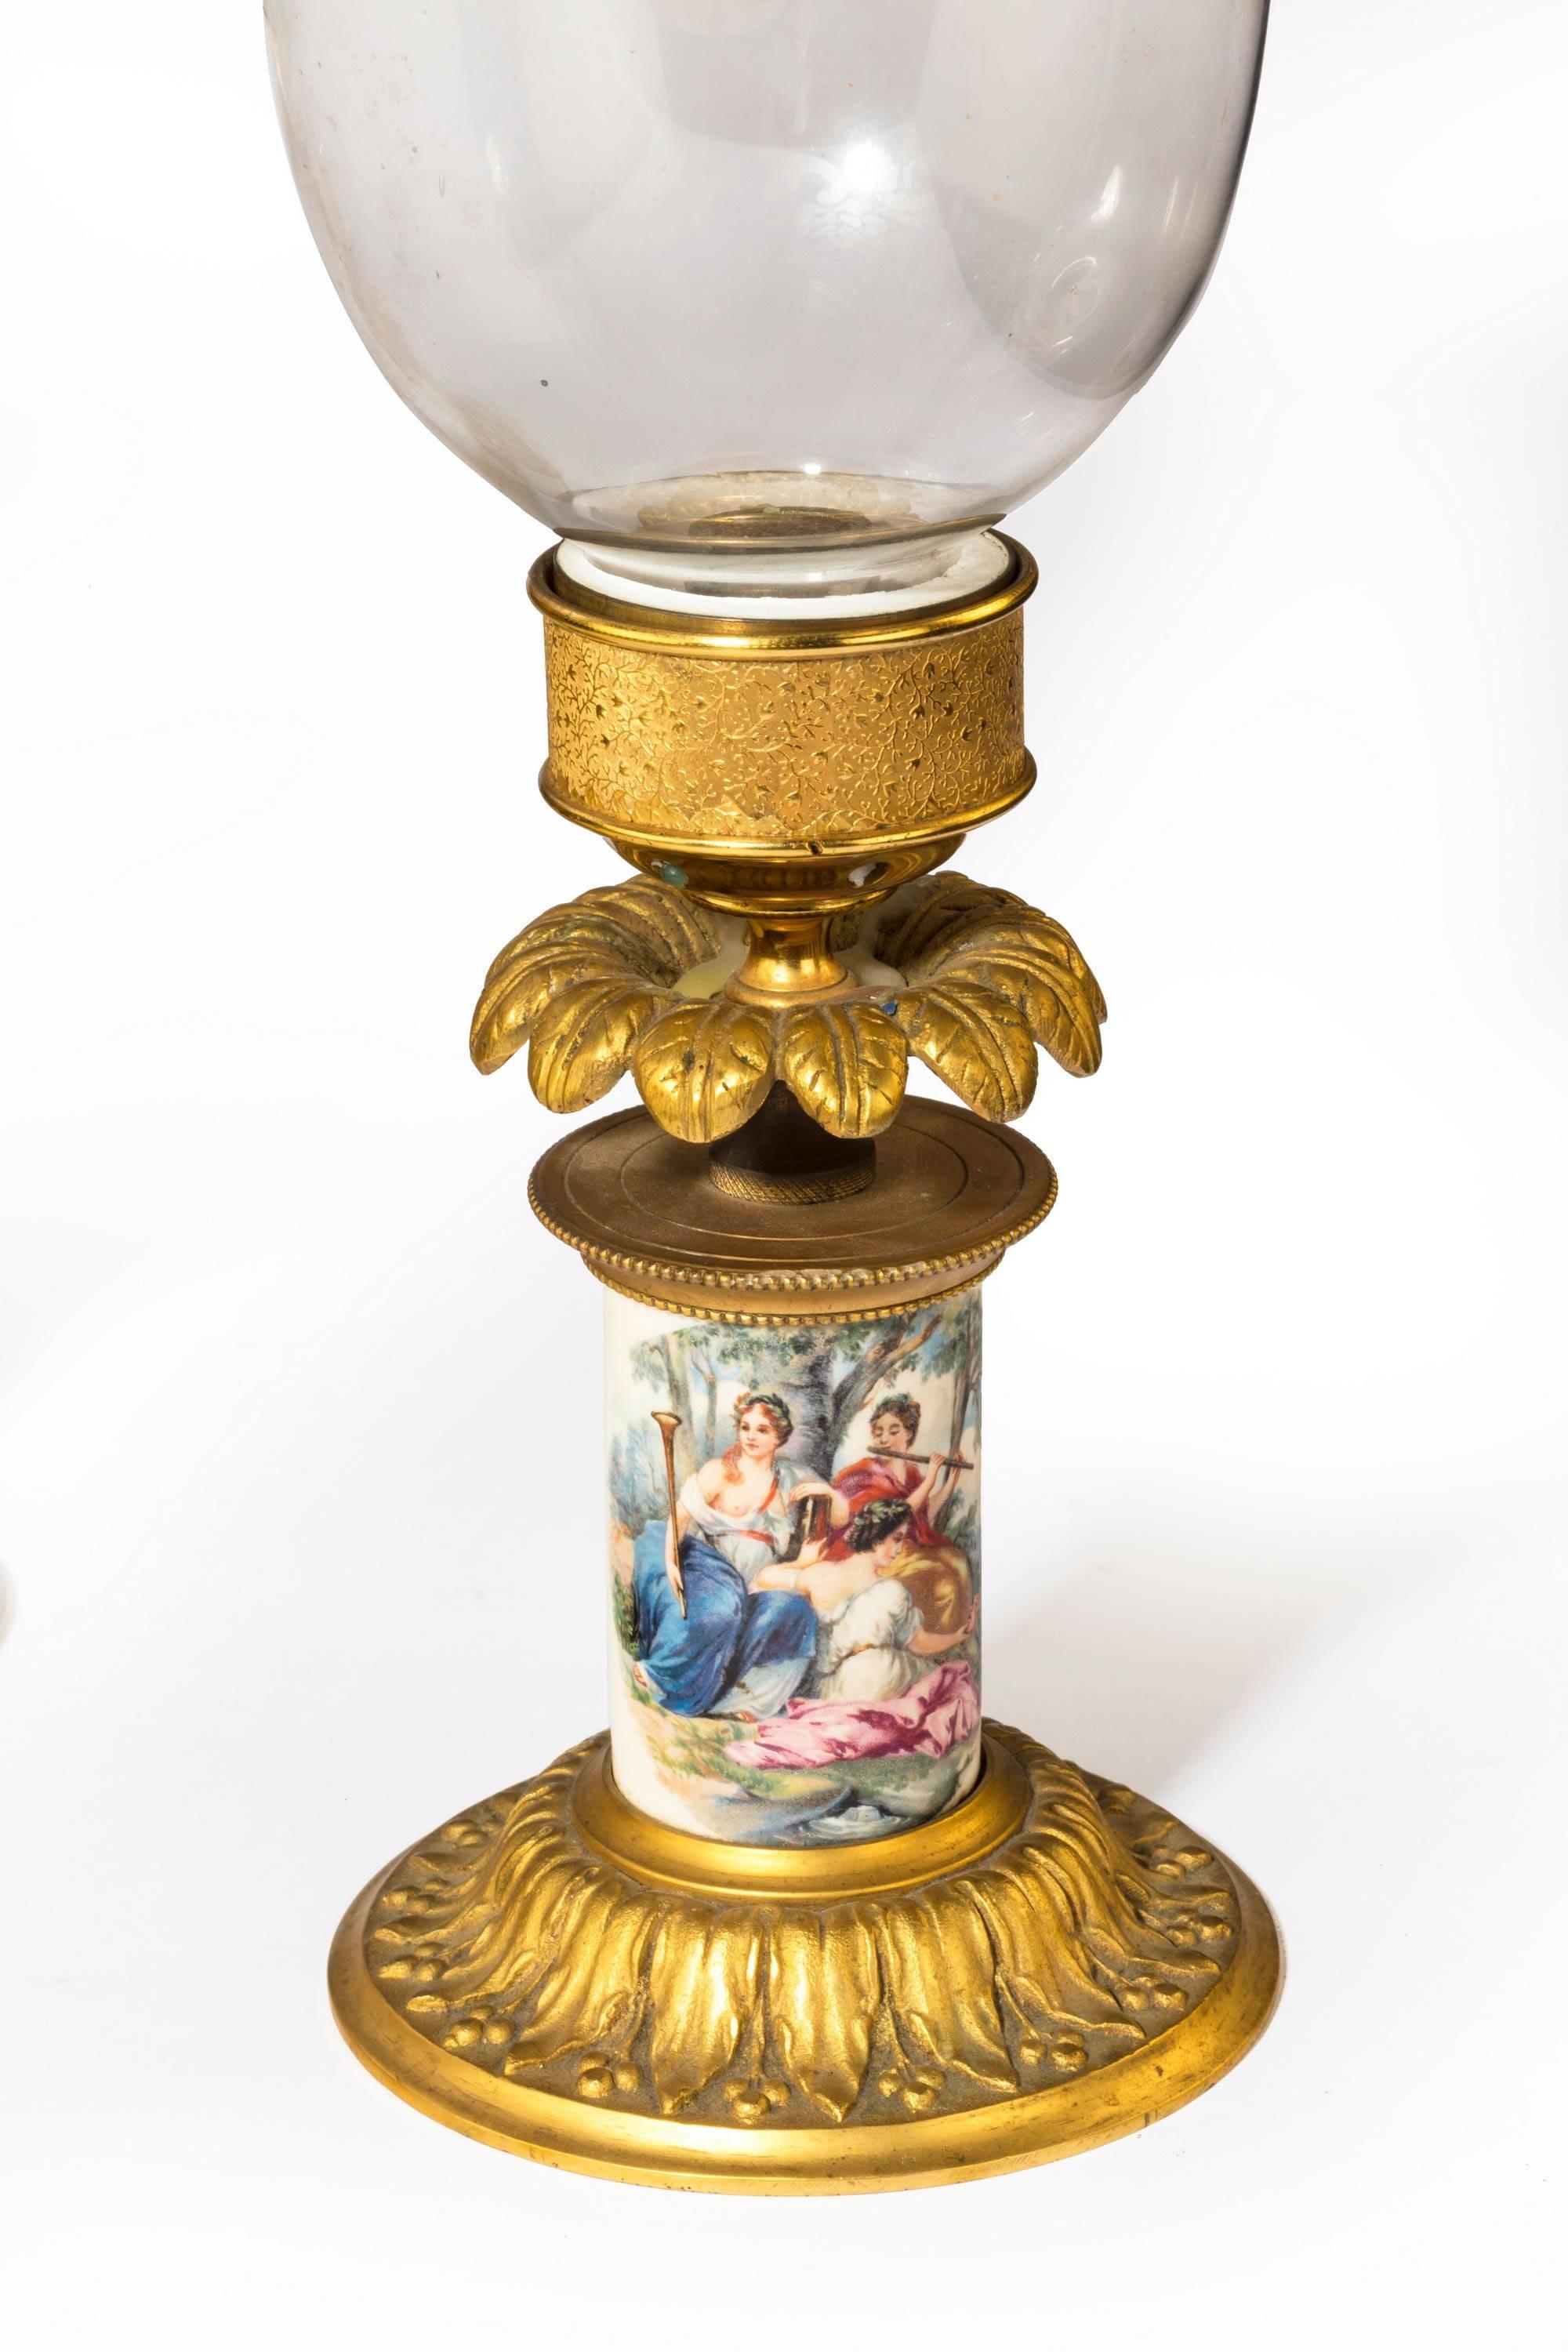 A pair of gilt bronze porcelain and glass storm lanterns. Retaining the original etched shades. The porcelain centre column with scenes influenced by Voltaire.